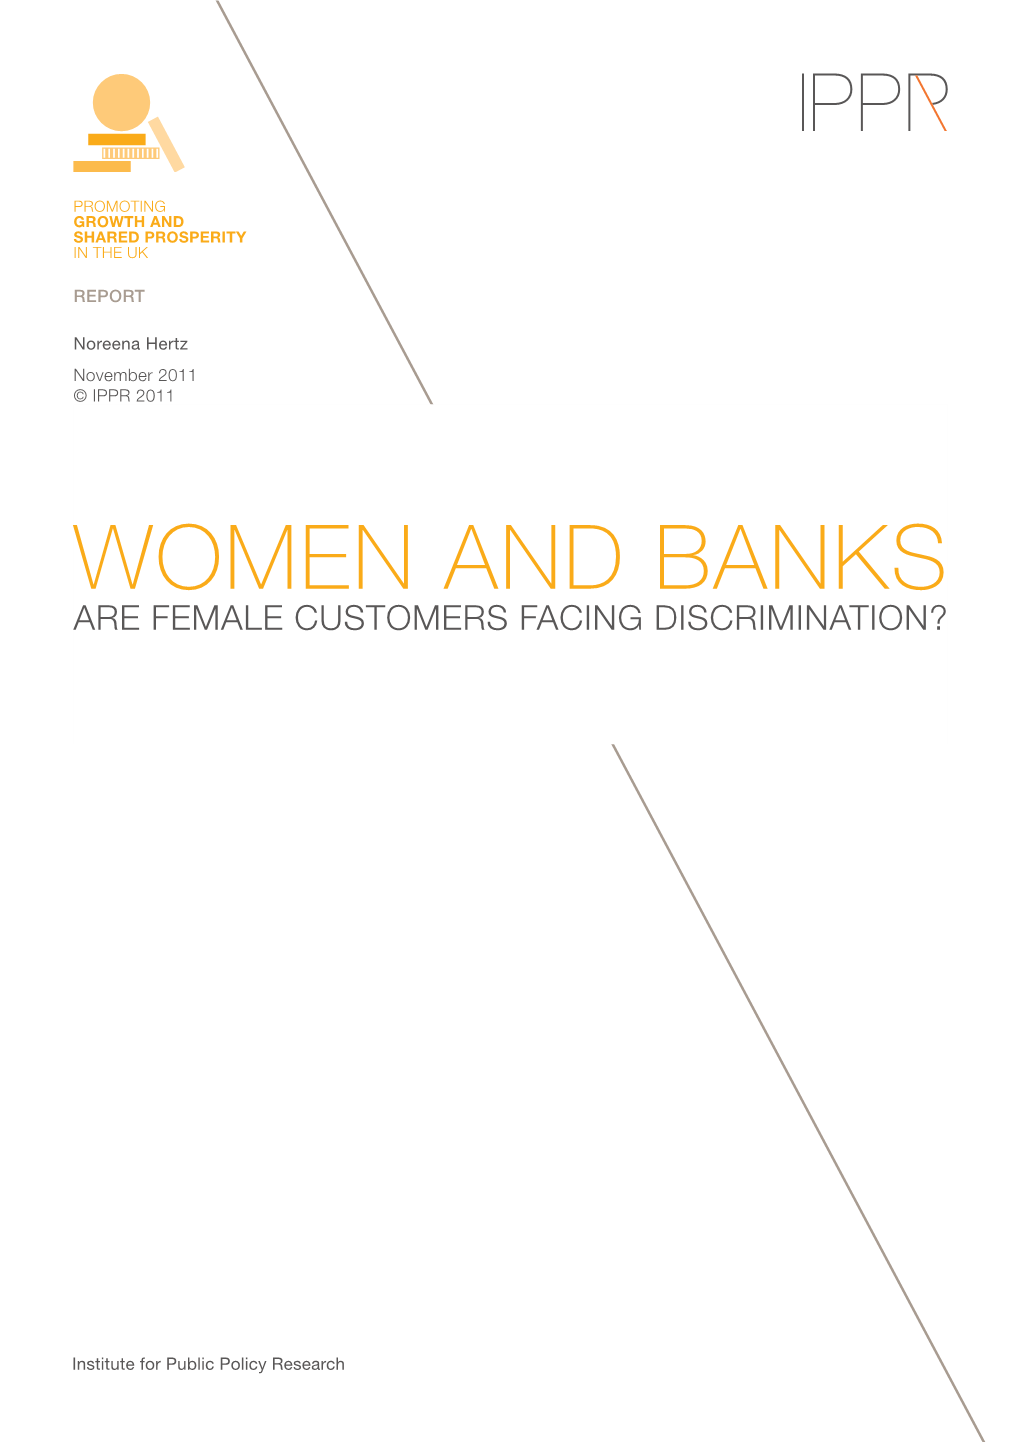 Women and Banks Are Female Customers Facing Discrimination?